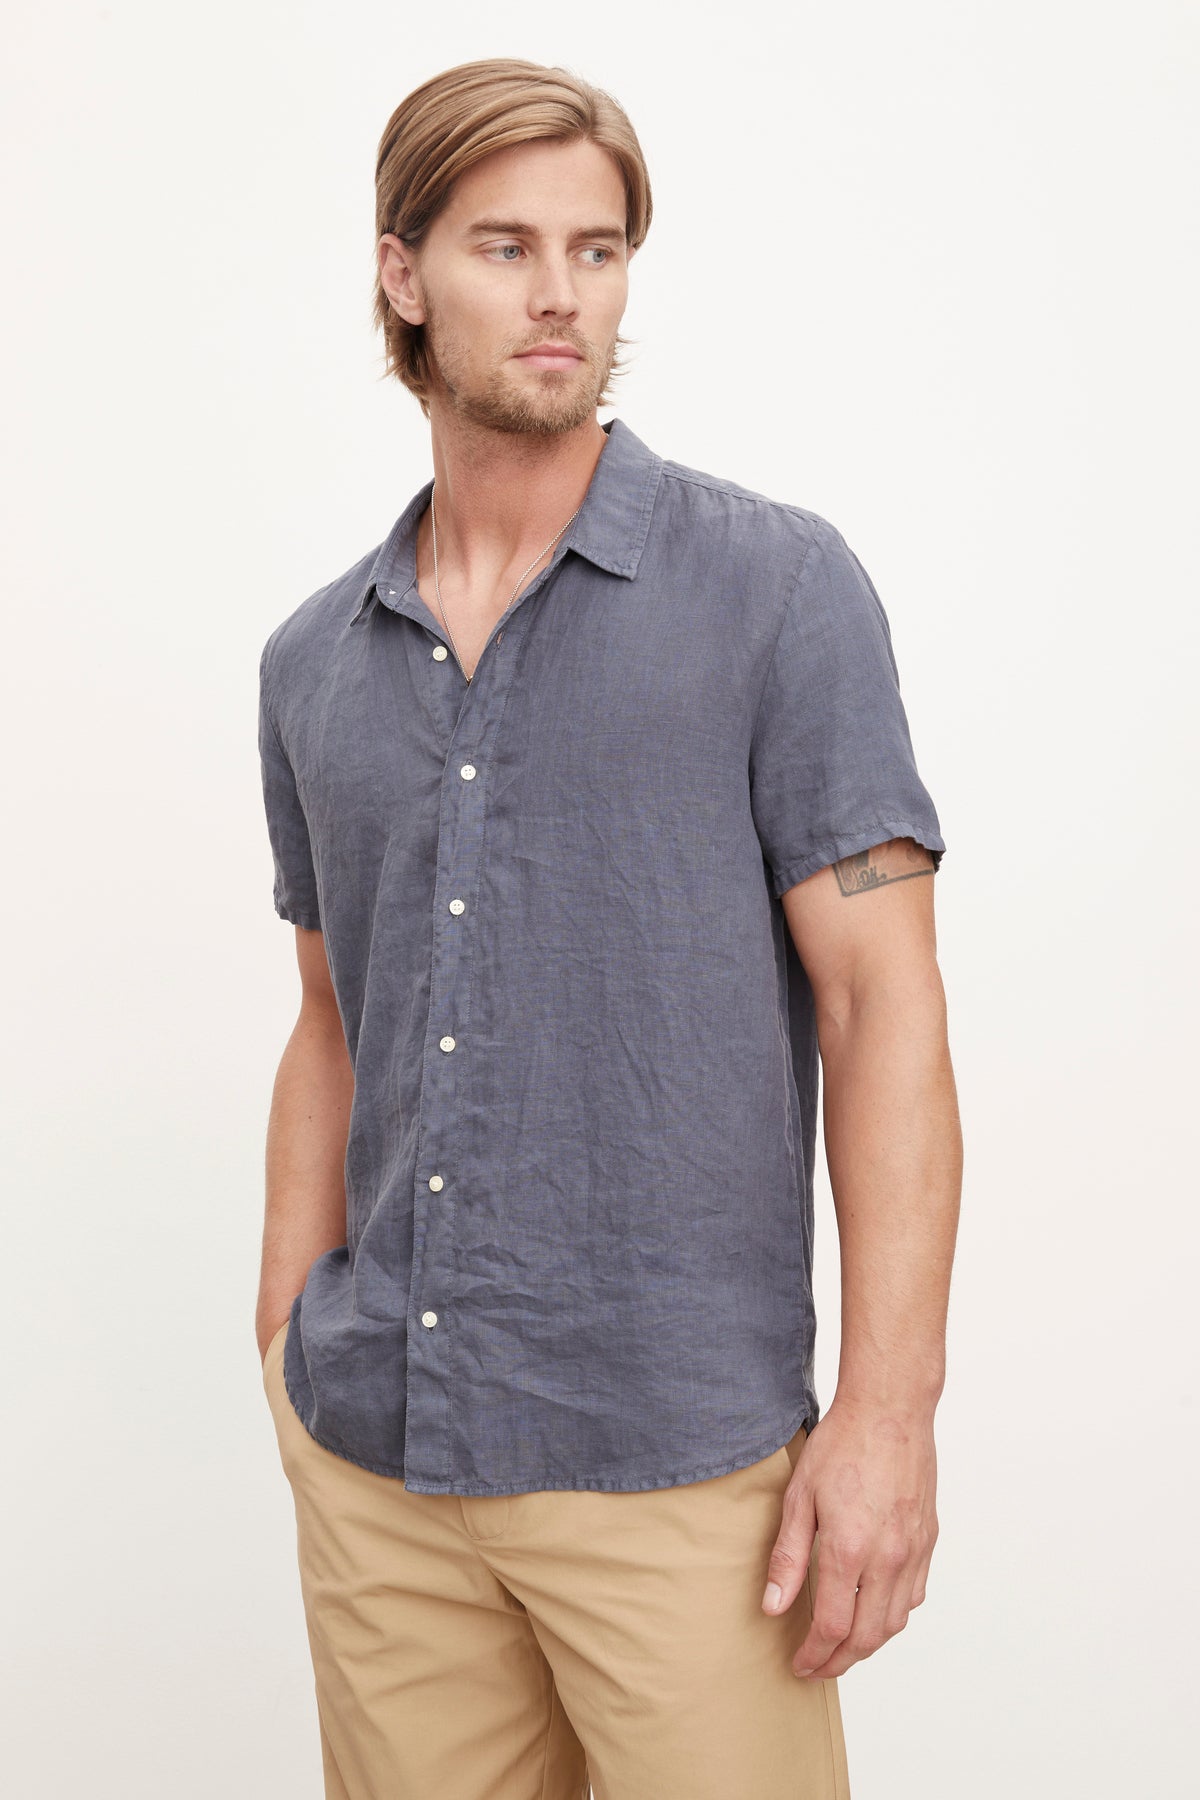 A person with light brown hair is wearing a short-sleeved blue MACKIE LINEN BUTTON-UP SHIRT by Velvet by Graham & Spencer and beige pants, standing against a plain white background, showcasing their perfect summer wardrobe.-36918688022721